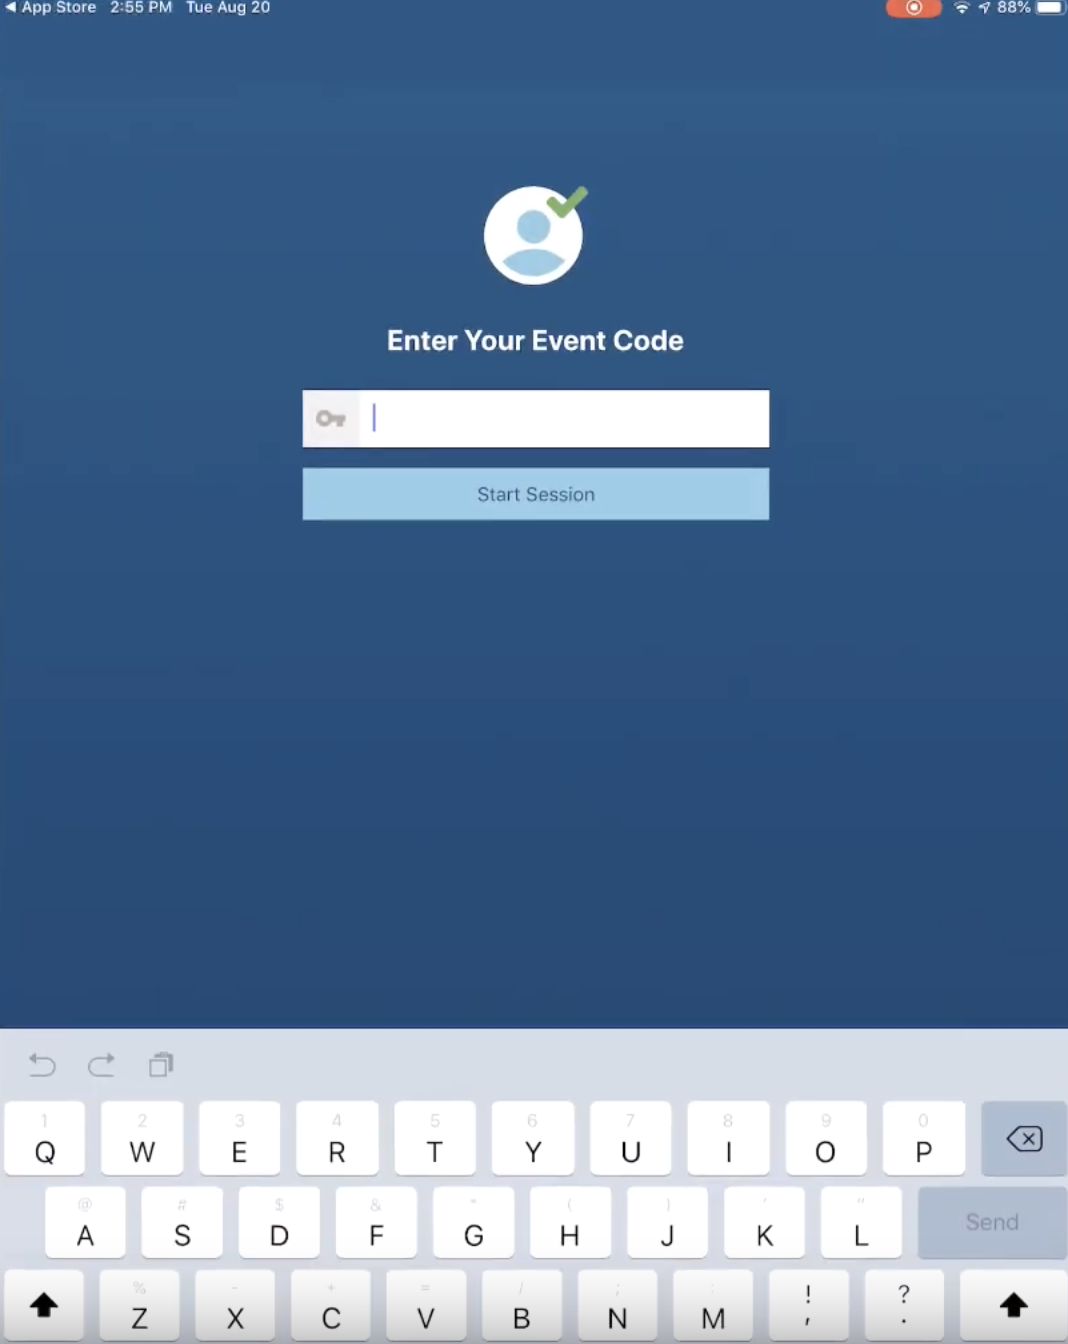 This is where you will write in your event code